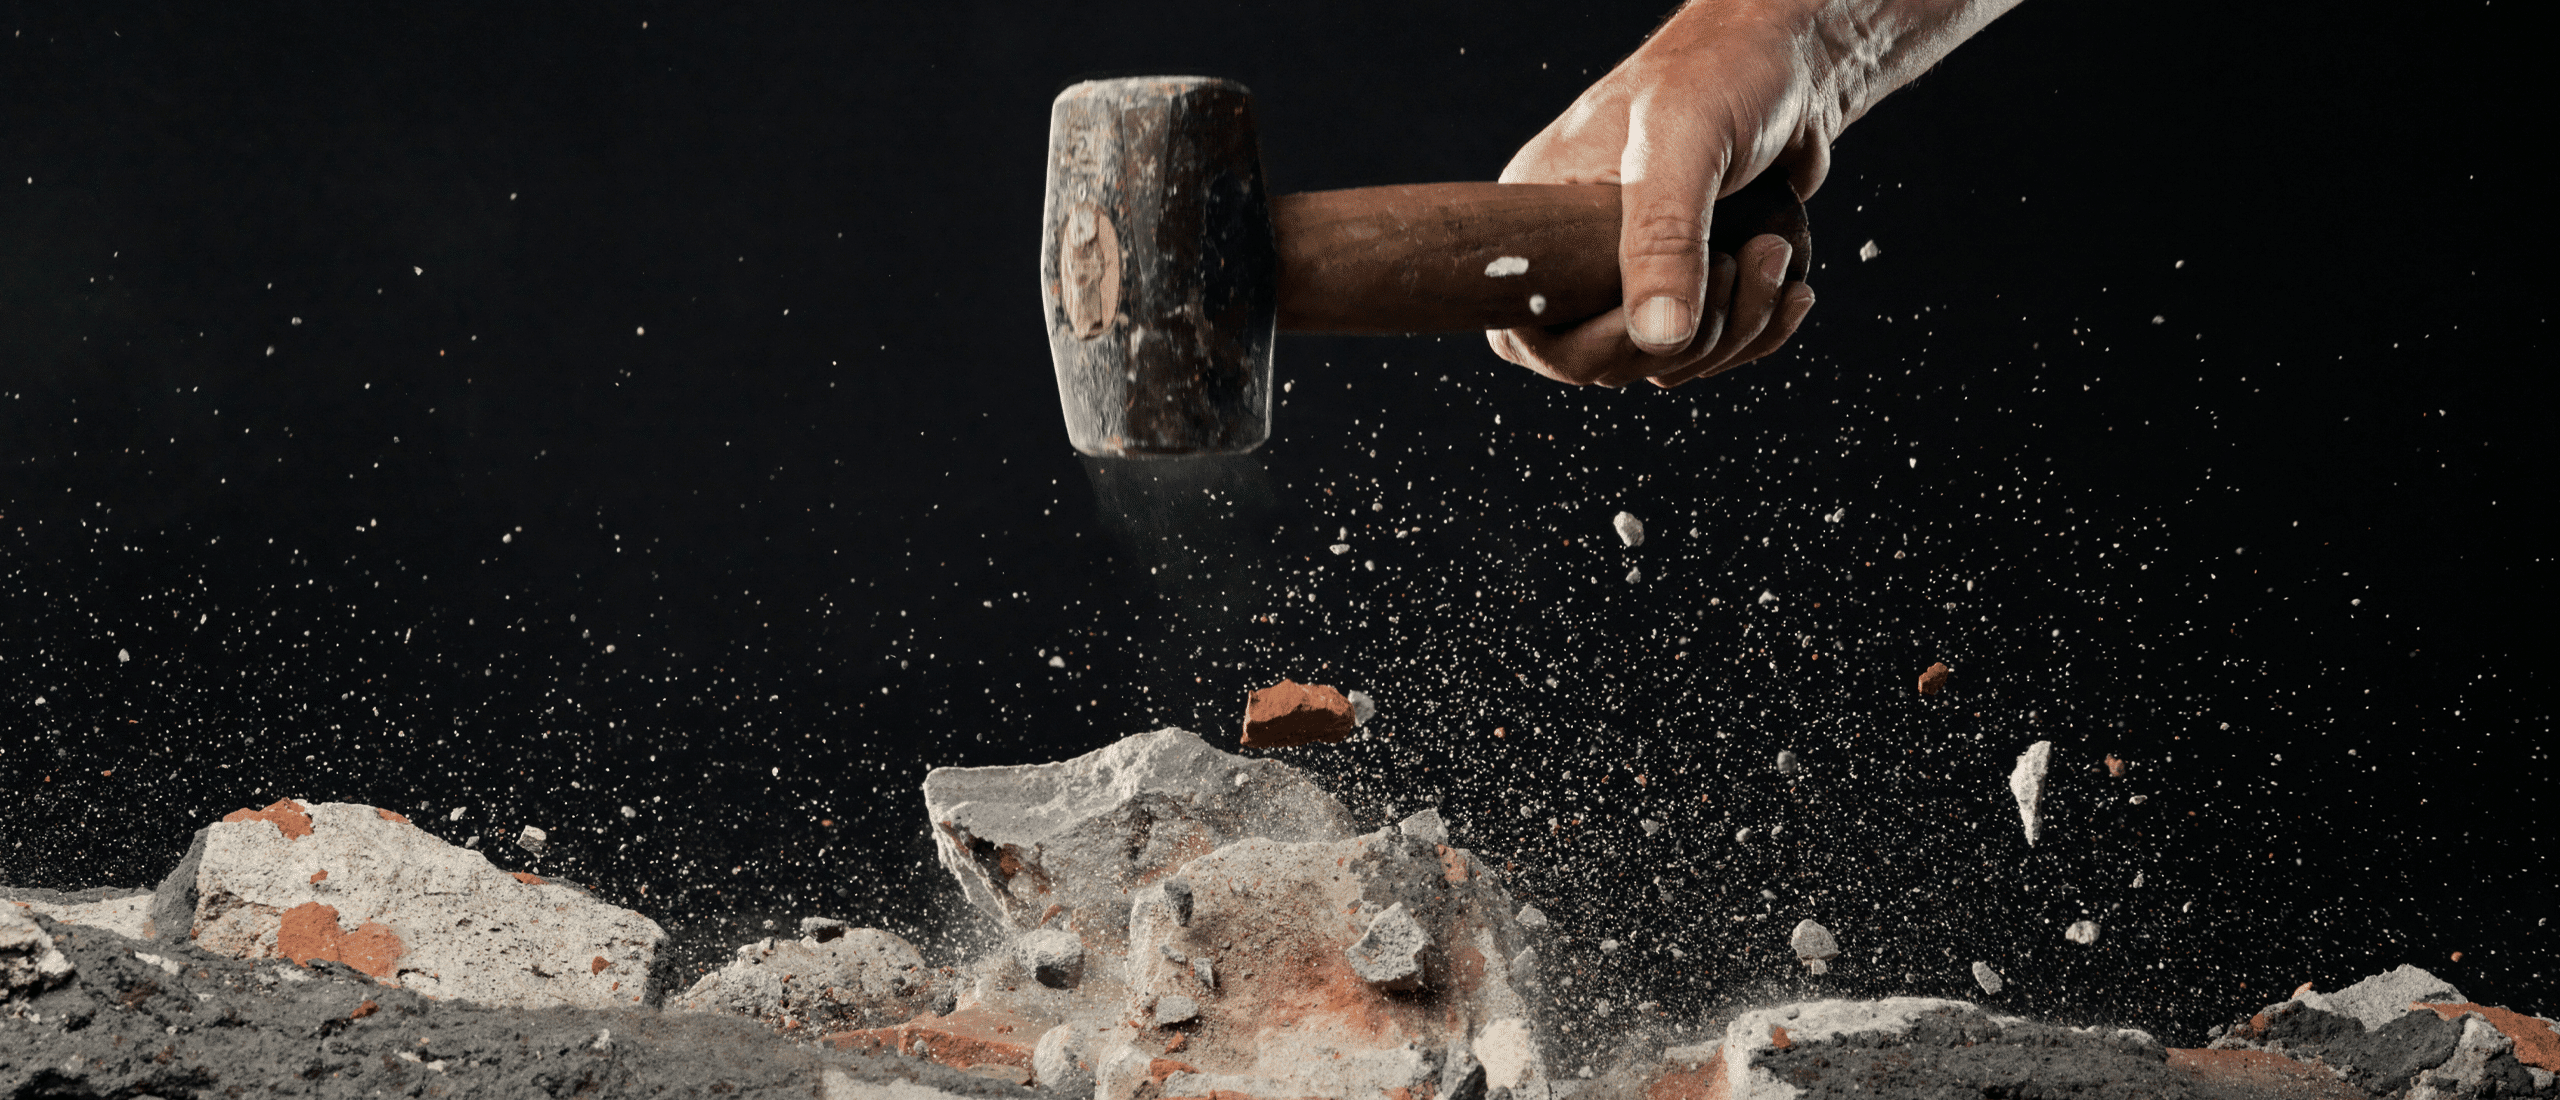 person smashing rocks with hammer